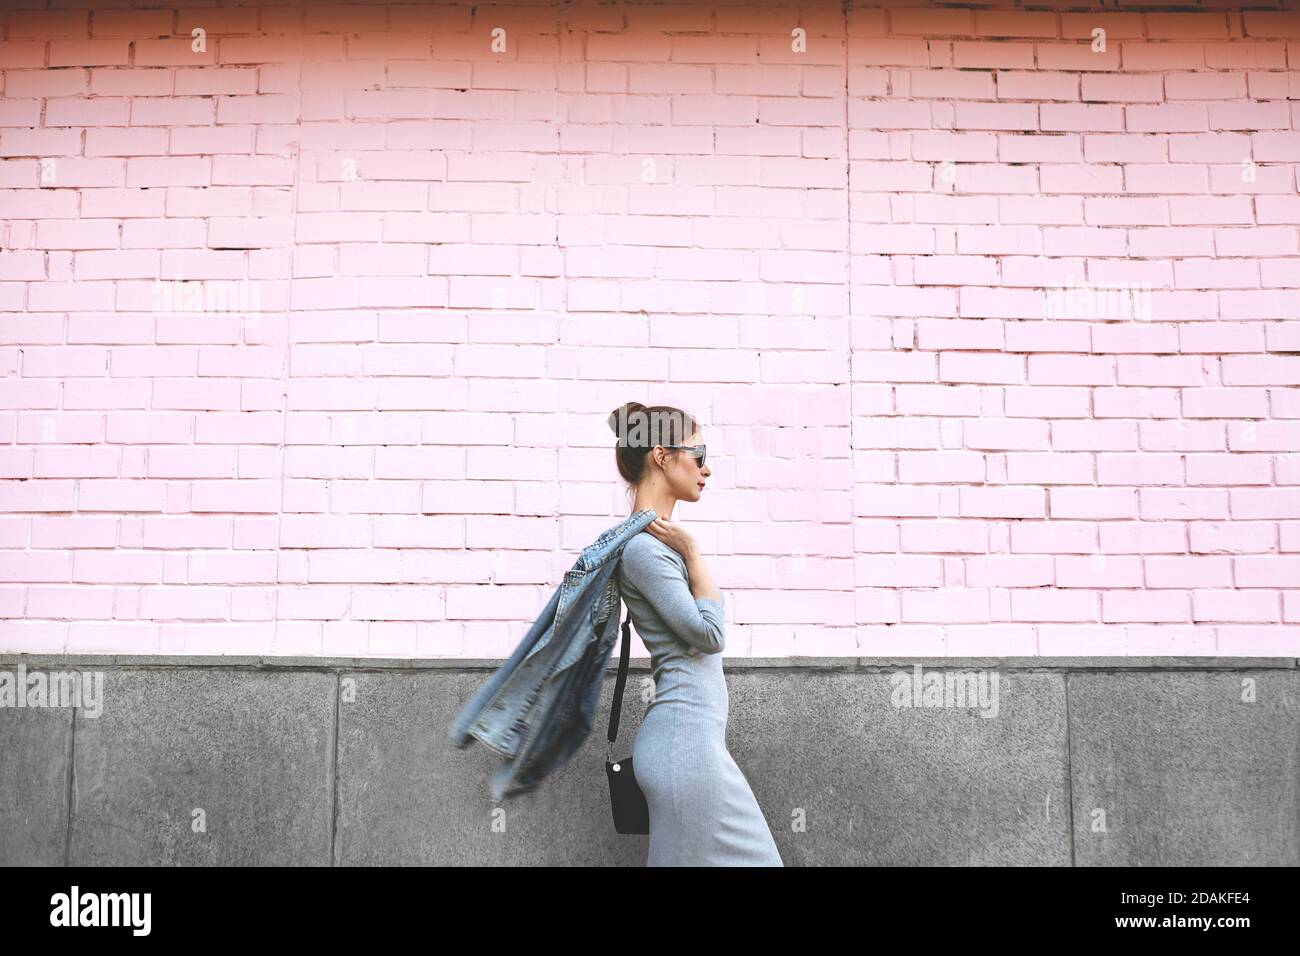 Street Style Shoot of Woman on Pink Wall. Swag Girl Wearing Jeans Jacket, grey Dress, Sunglass. Fashion Lifestyle Outdoor Stock Photo